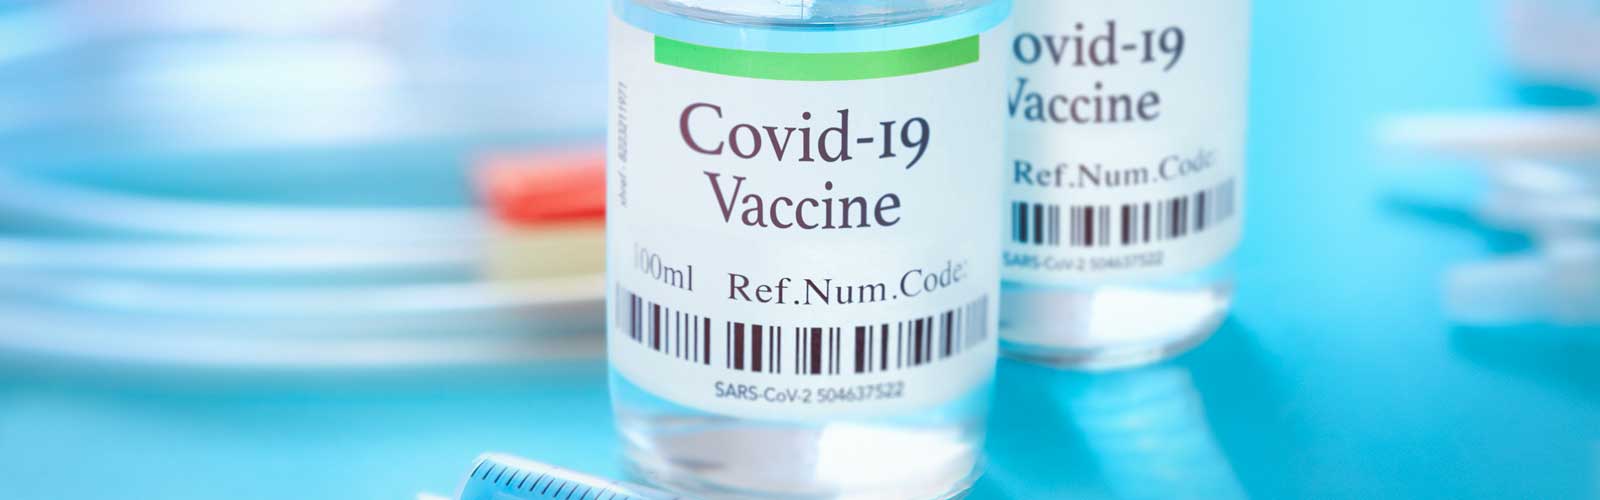 Covid-19 vaccines in the lab